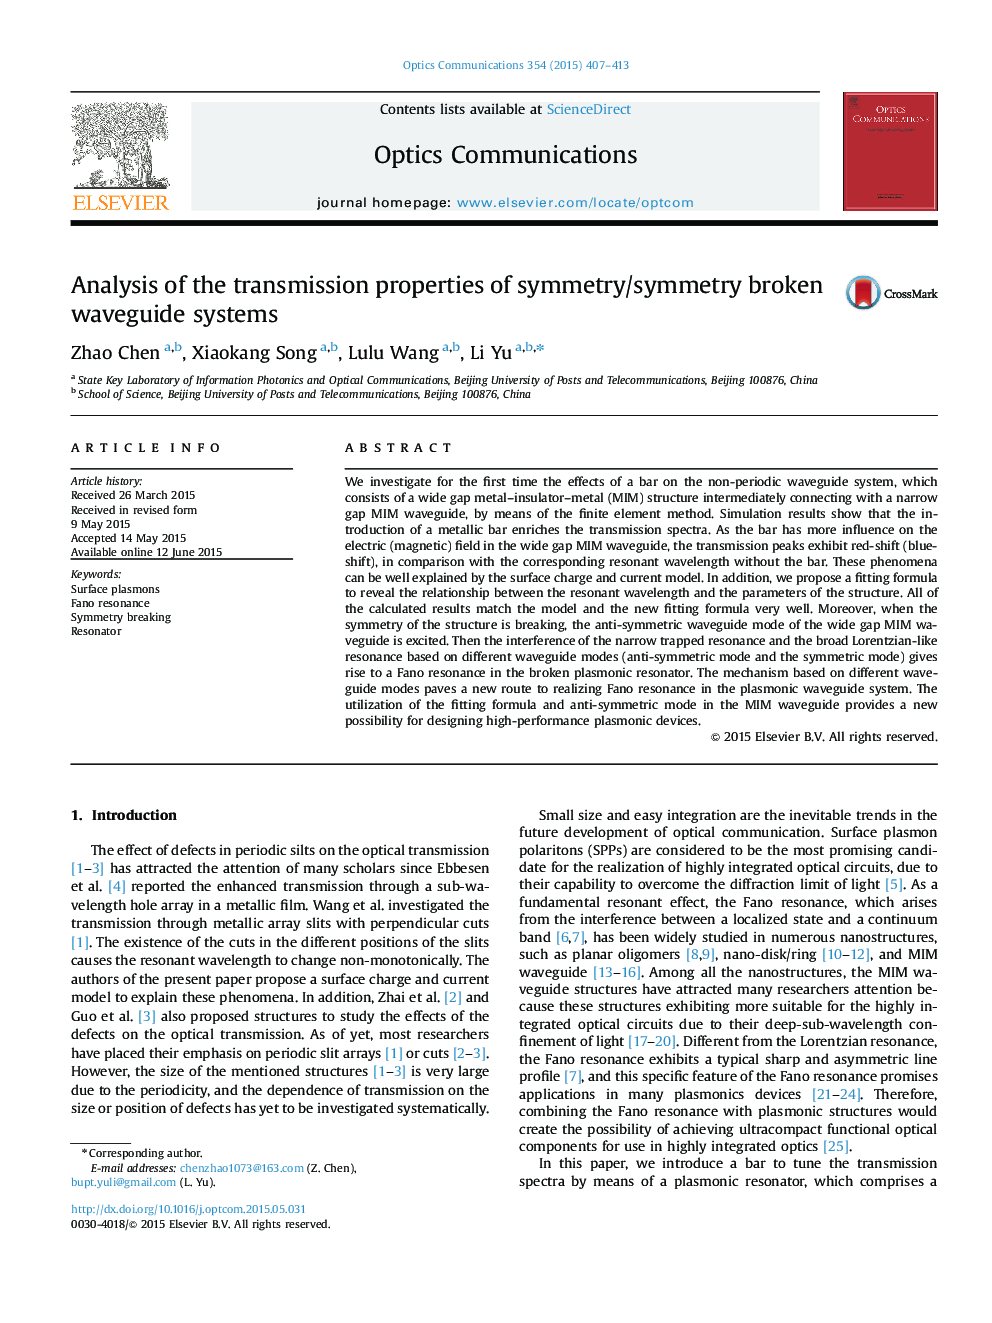 Analysis of the transmission properties of symmetry/symmetry broken waveguide systems